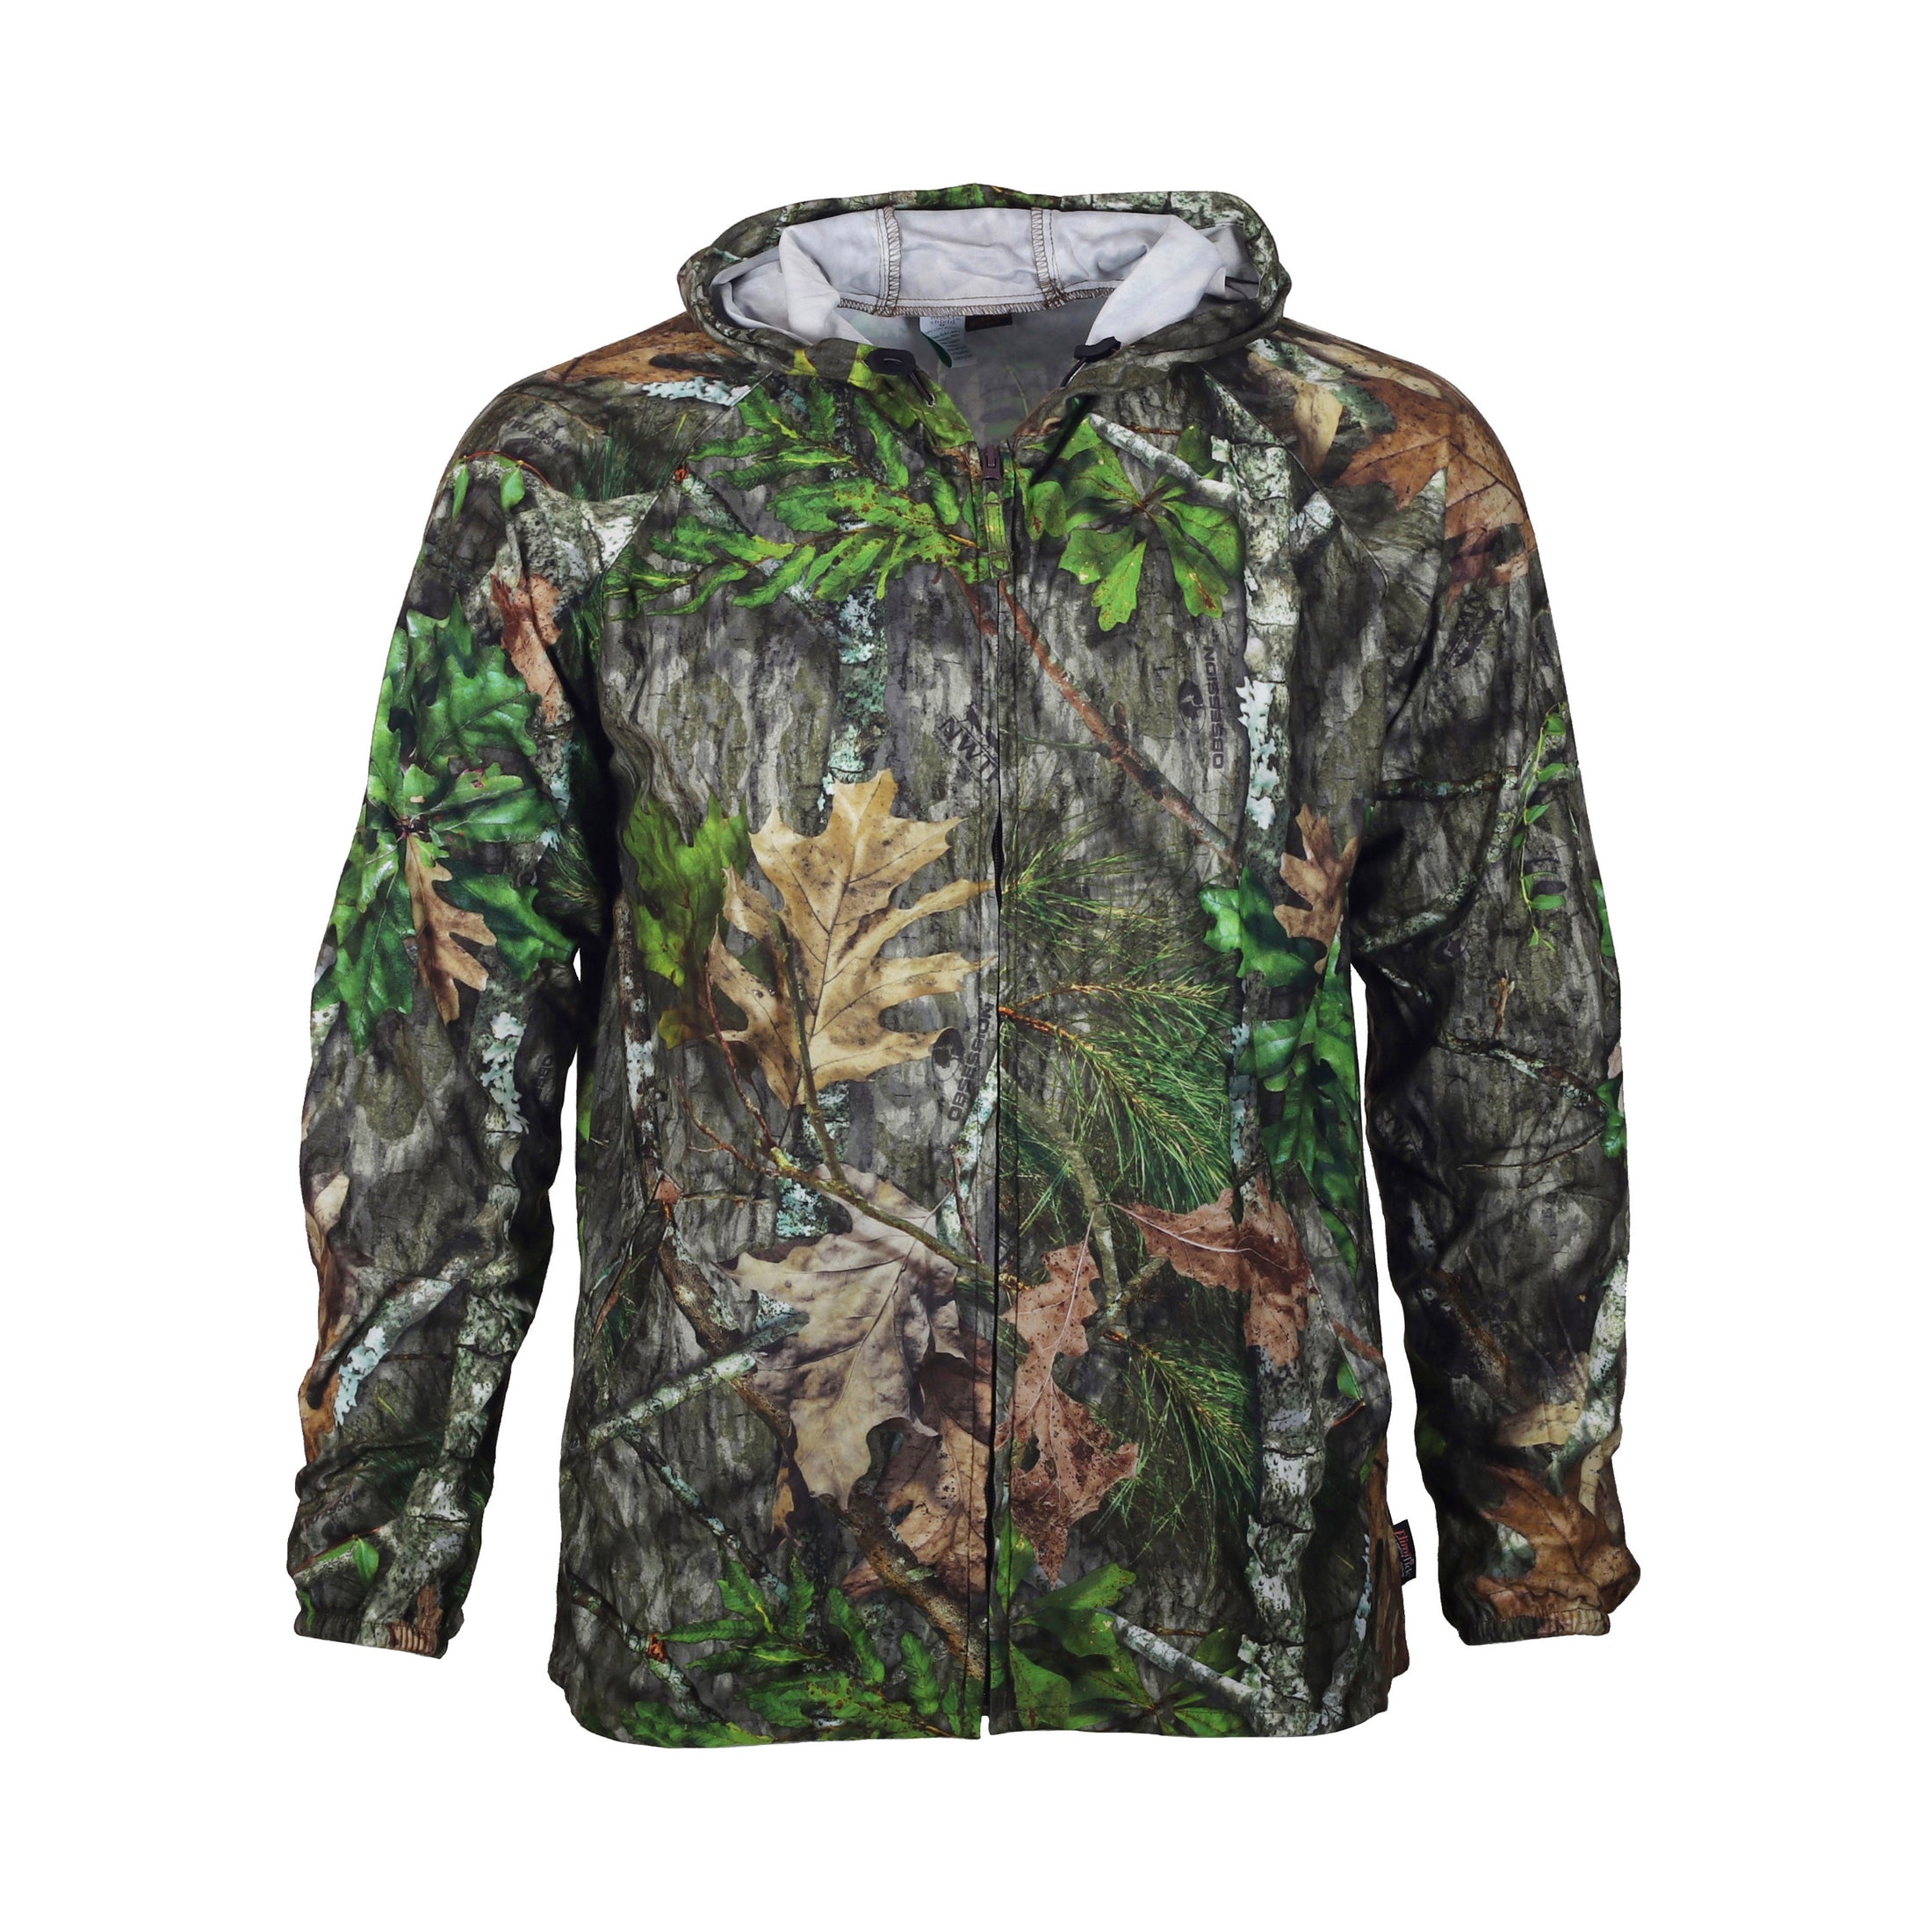 gamehide ElimiTick Insect Repellent Cover Up Jacket front (mossy oak obsession)